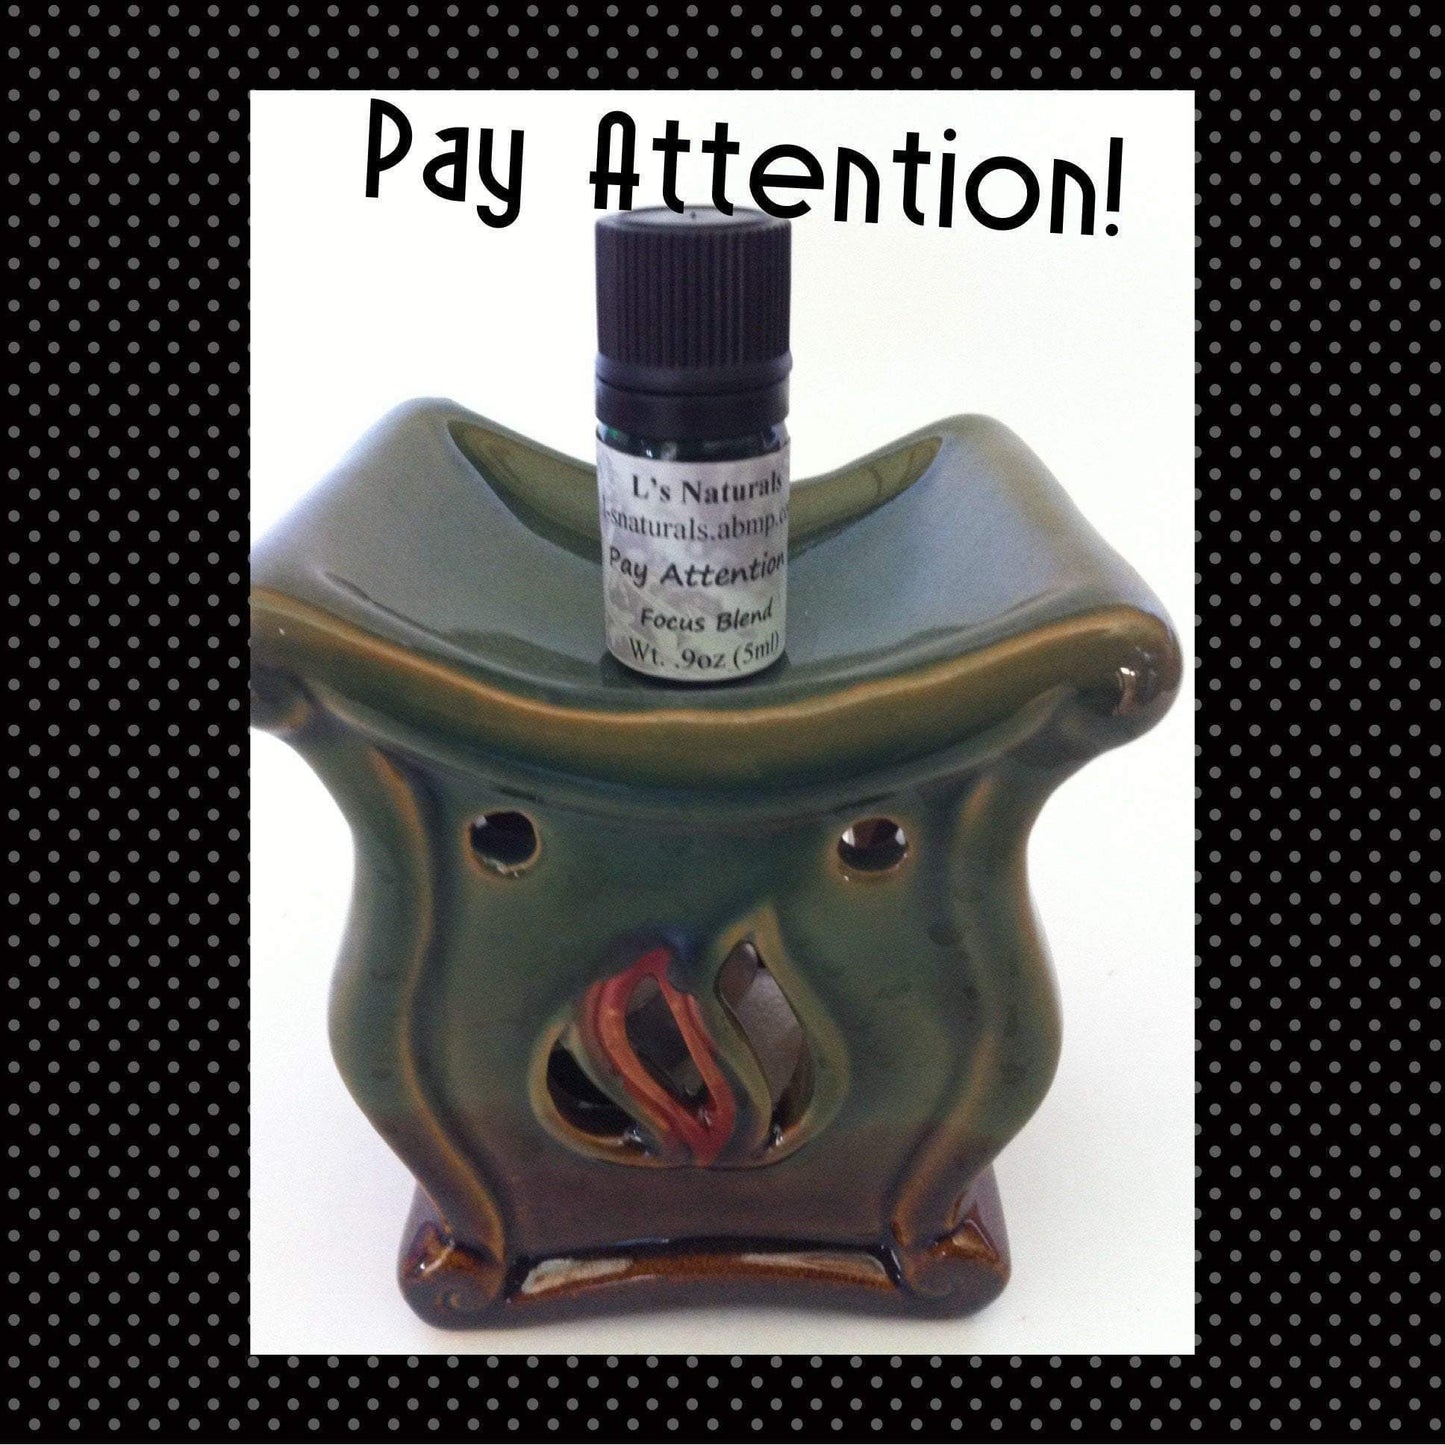 Pay Attention! (Aromatherapy Focus Blend) (5ml,10ml) - L's Naturals | Bath & Body Boutique